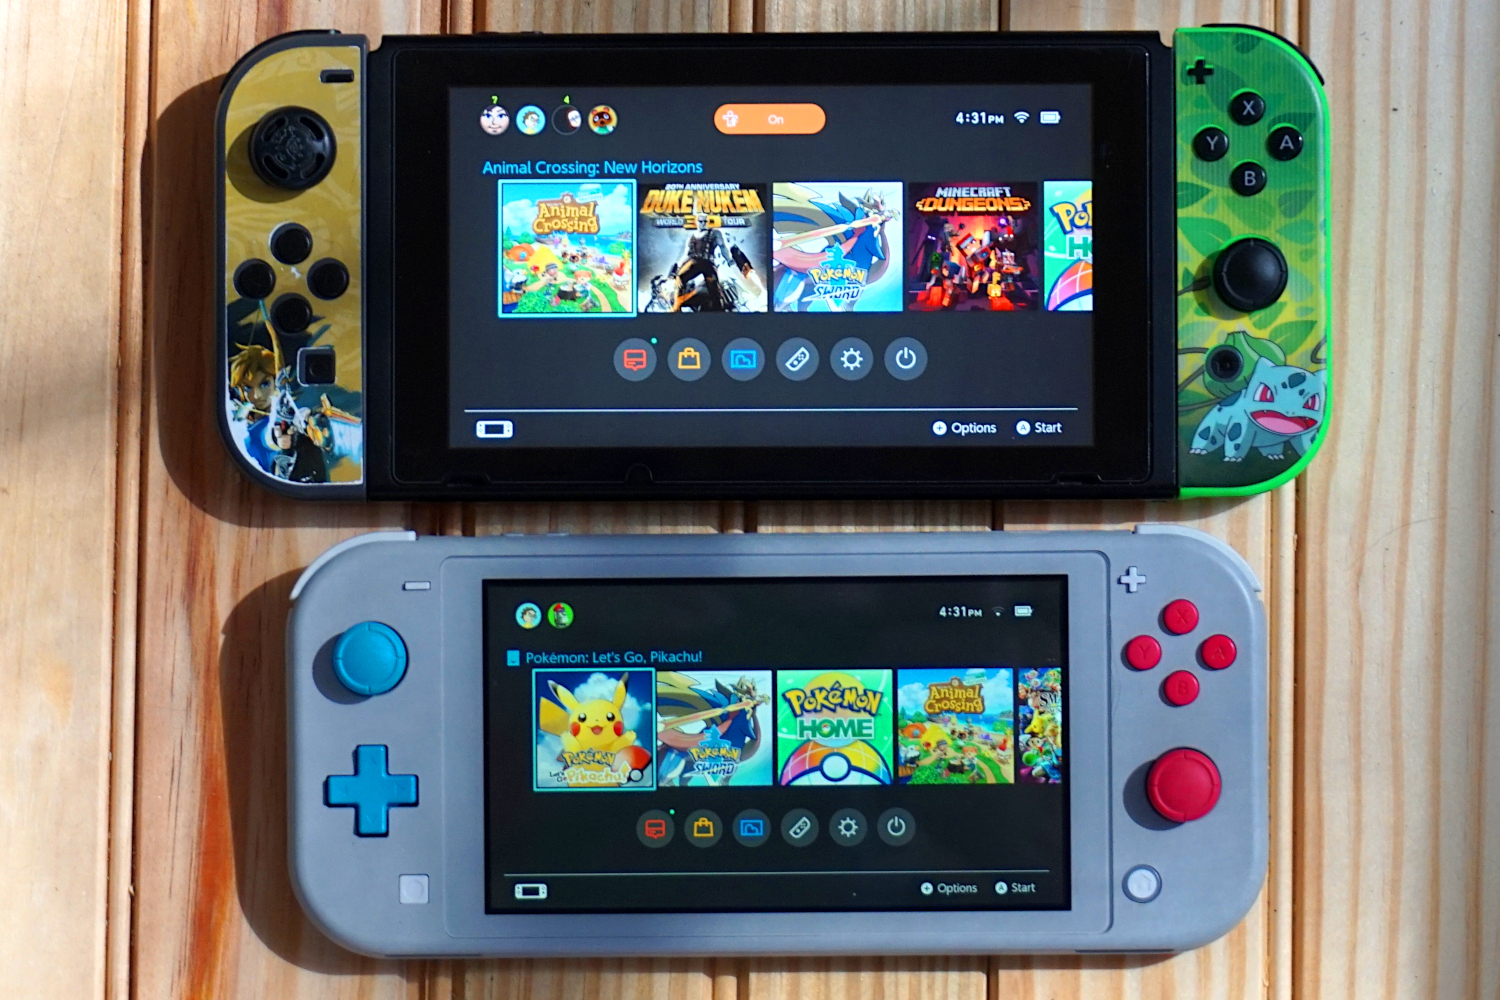 Vaccinere Forskel intellektuel How to Gameshare on Your Nintendo Switch | Digital Trends